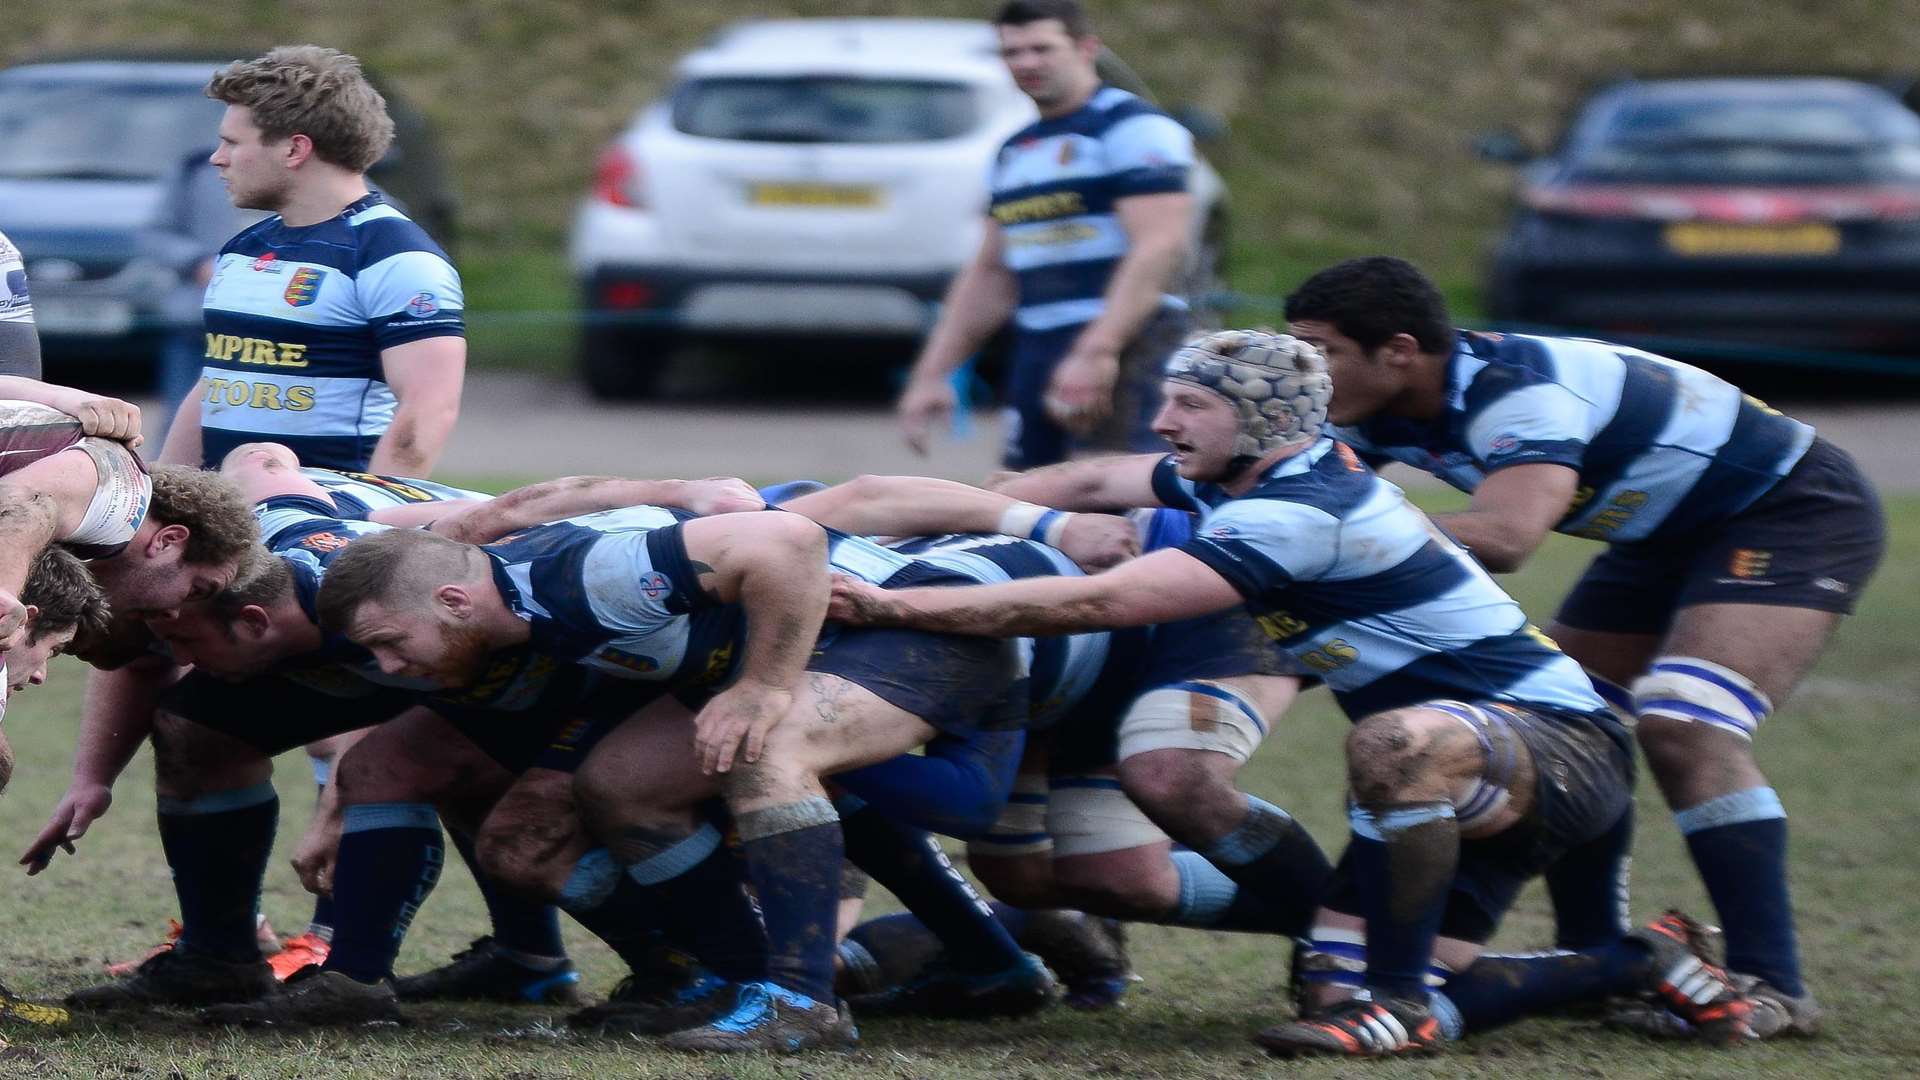 Dover's scrum in action against Sidcup in the London 1 South clash at Crabble